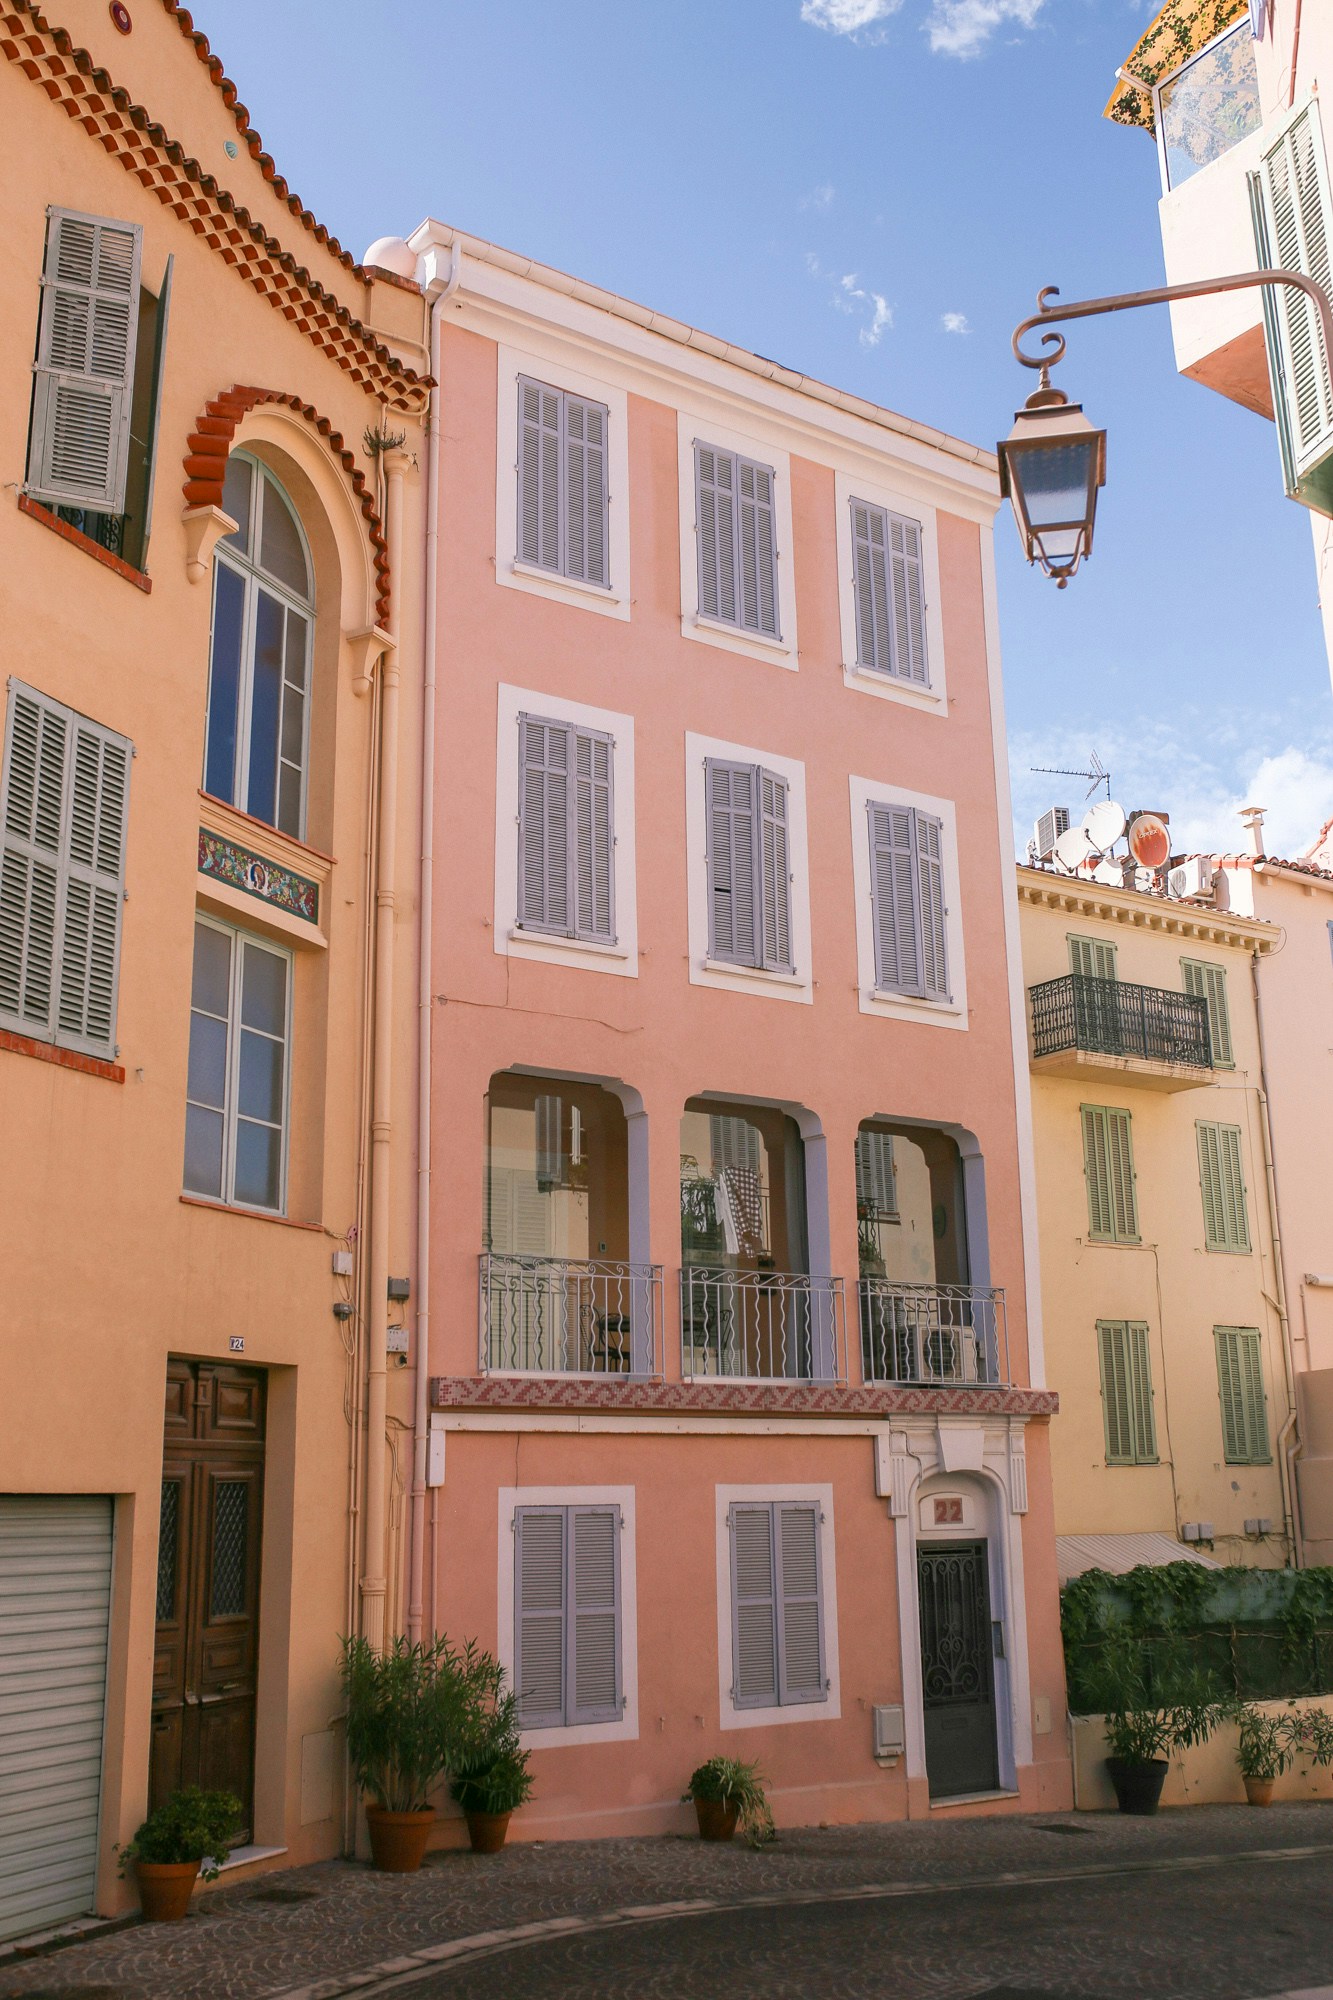 Colourful houses in Le Suquet, Cannes